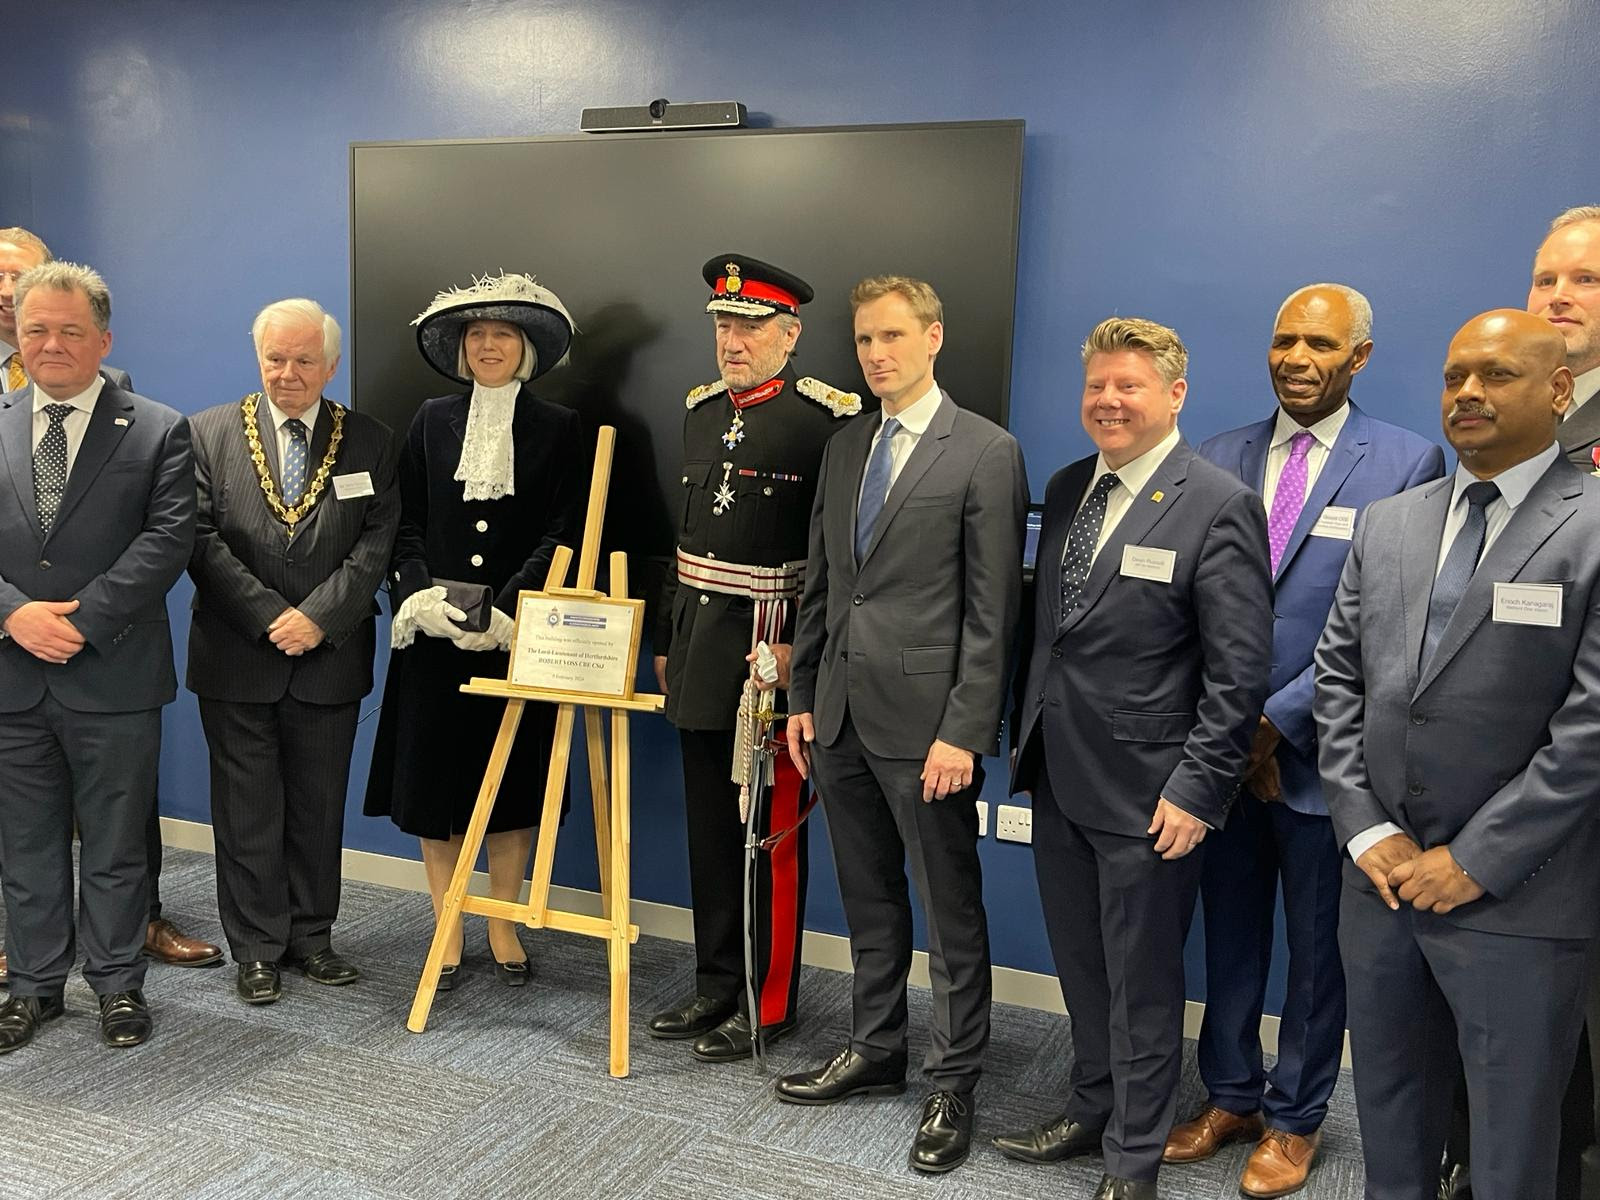 Official Opening of the new Police Station for Watford